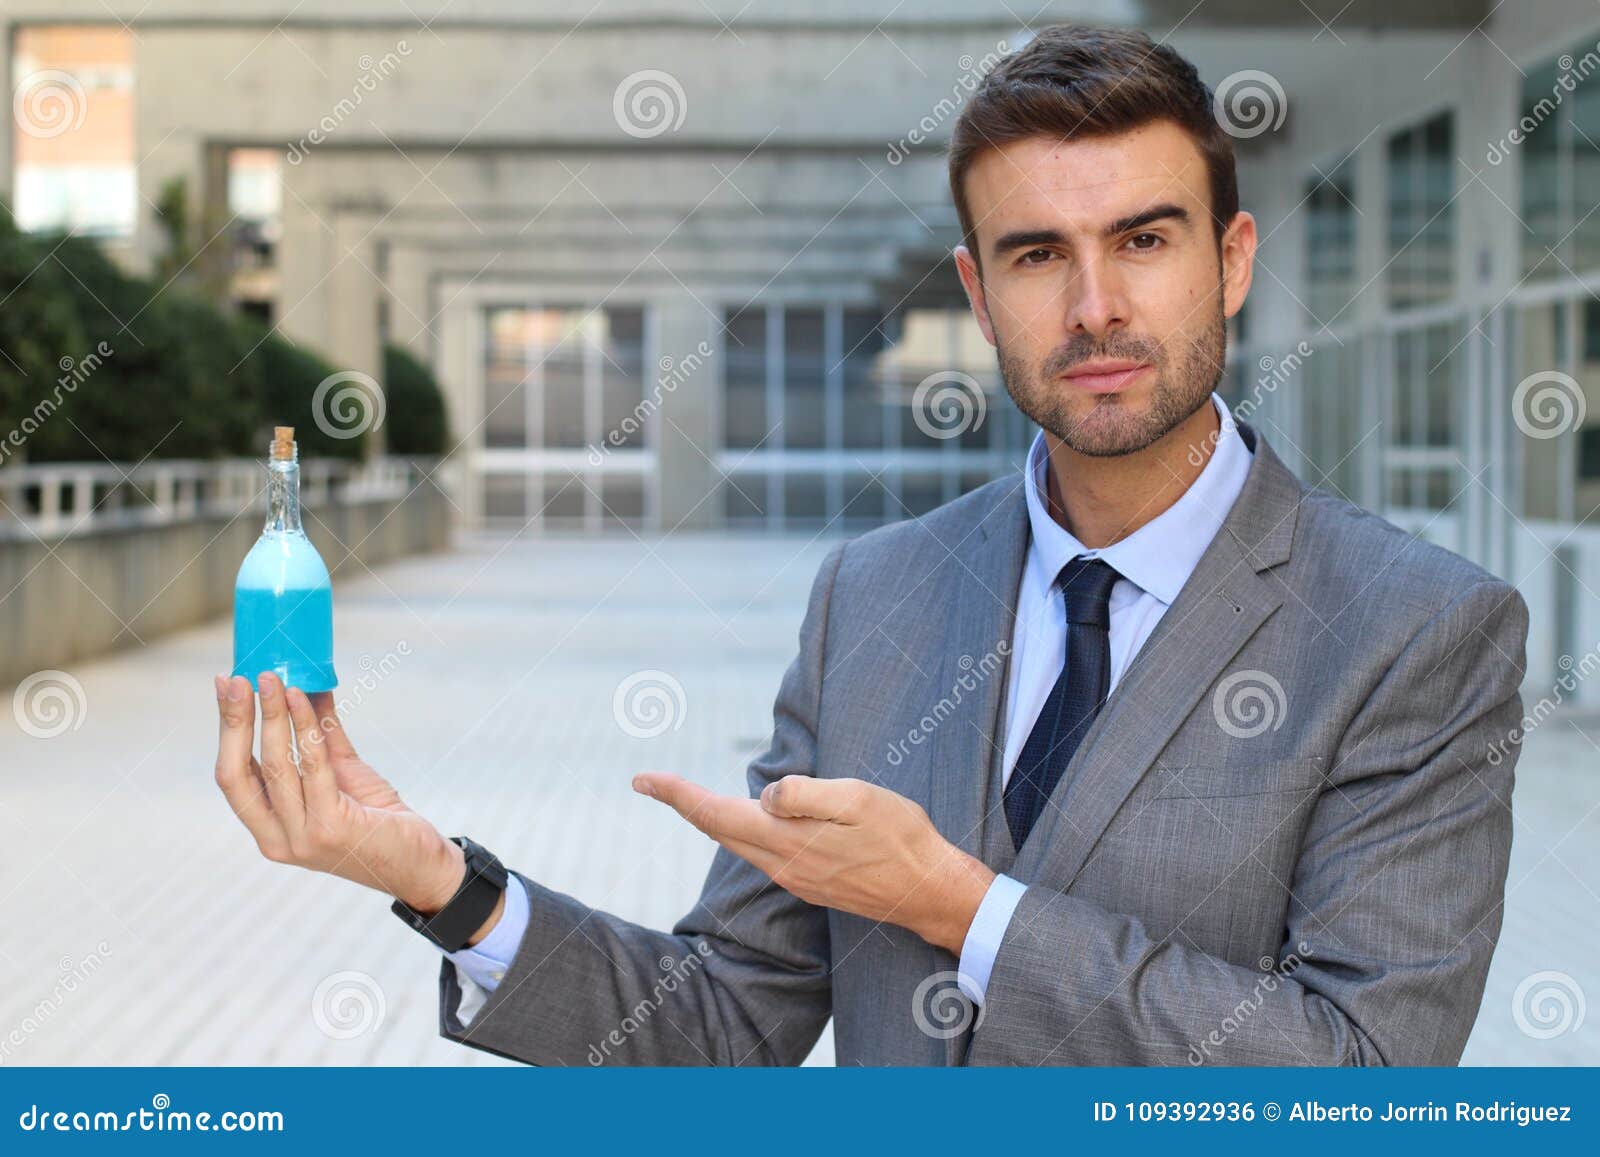 cocky businessman holding a potion